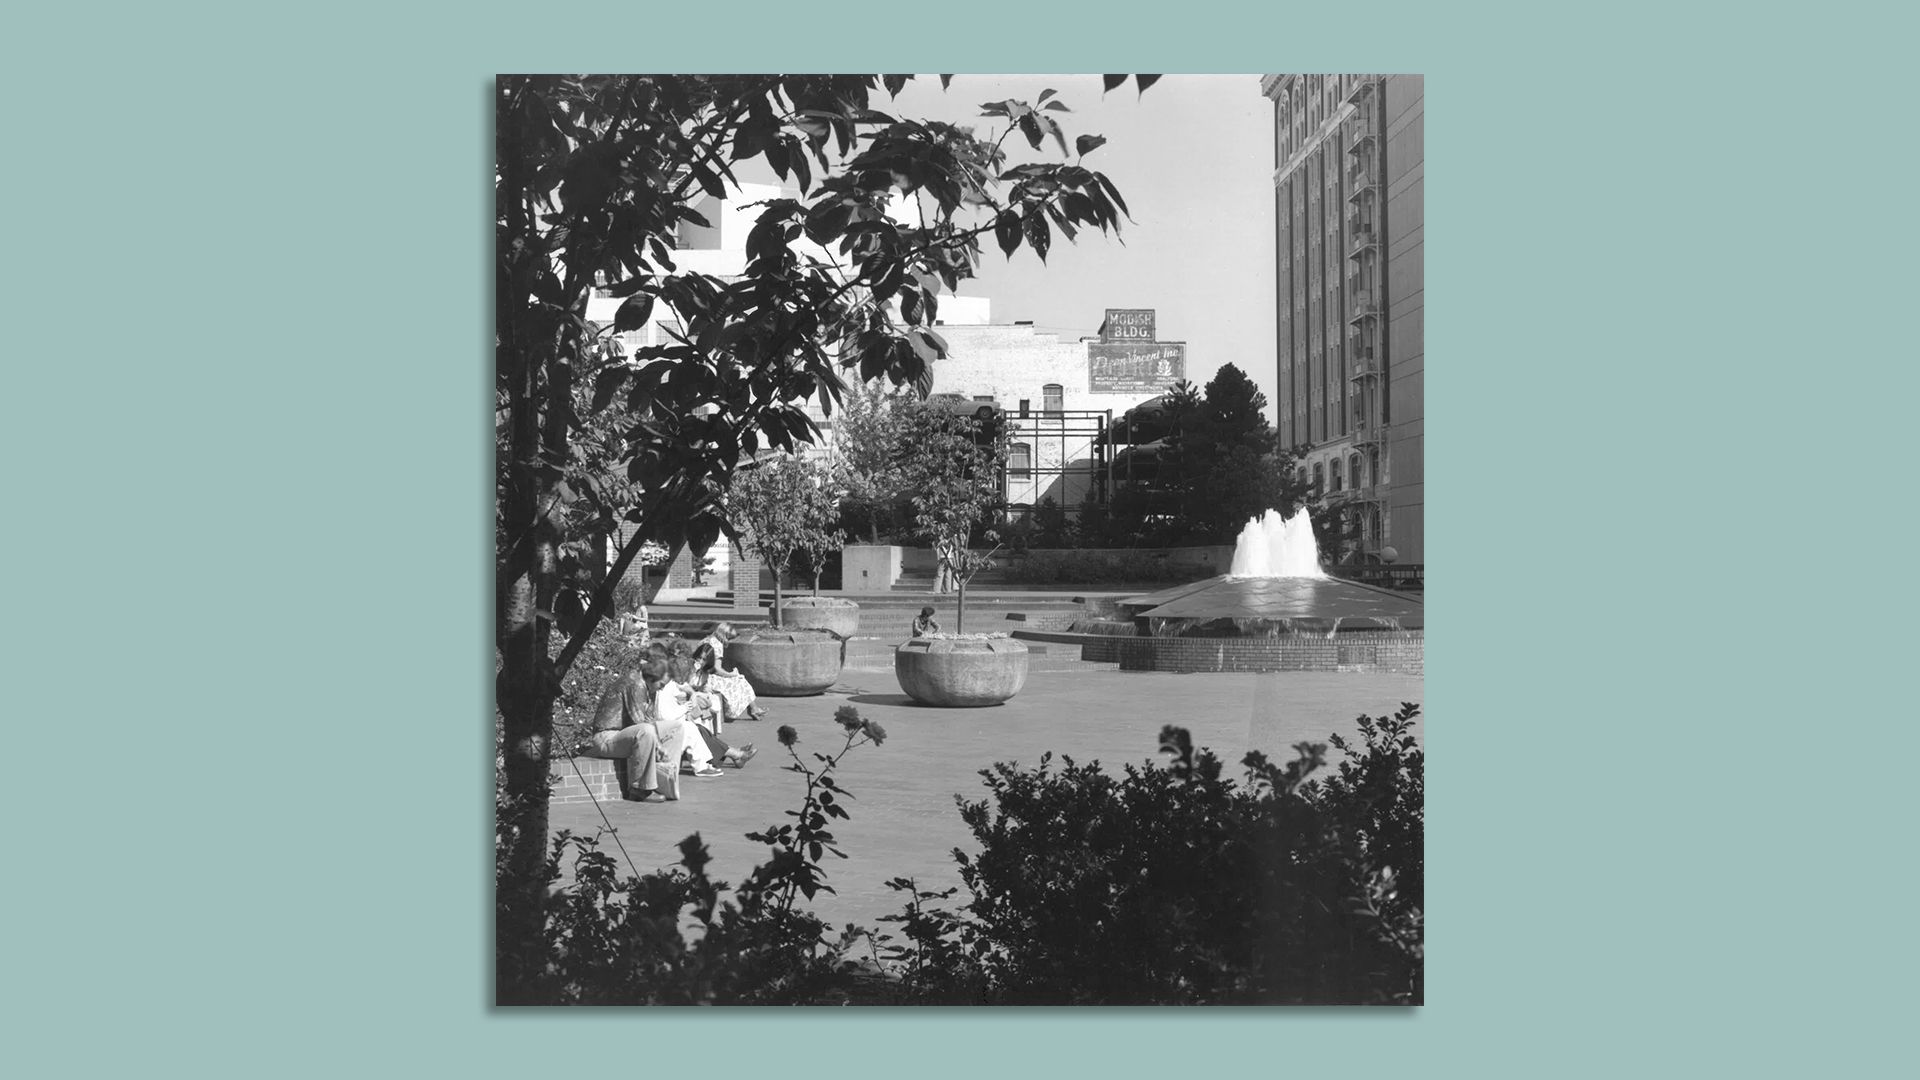 An archival image of O'Bryant Square park in Portland with the rose-shaped fountain in the background.